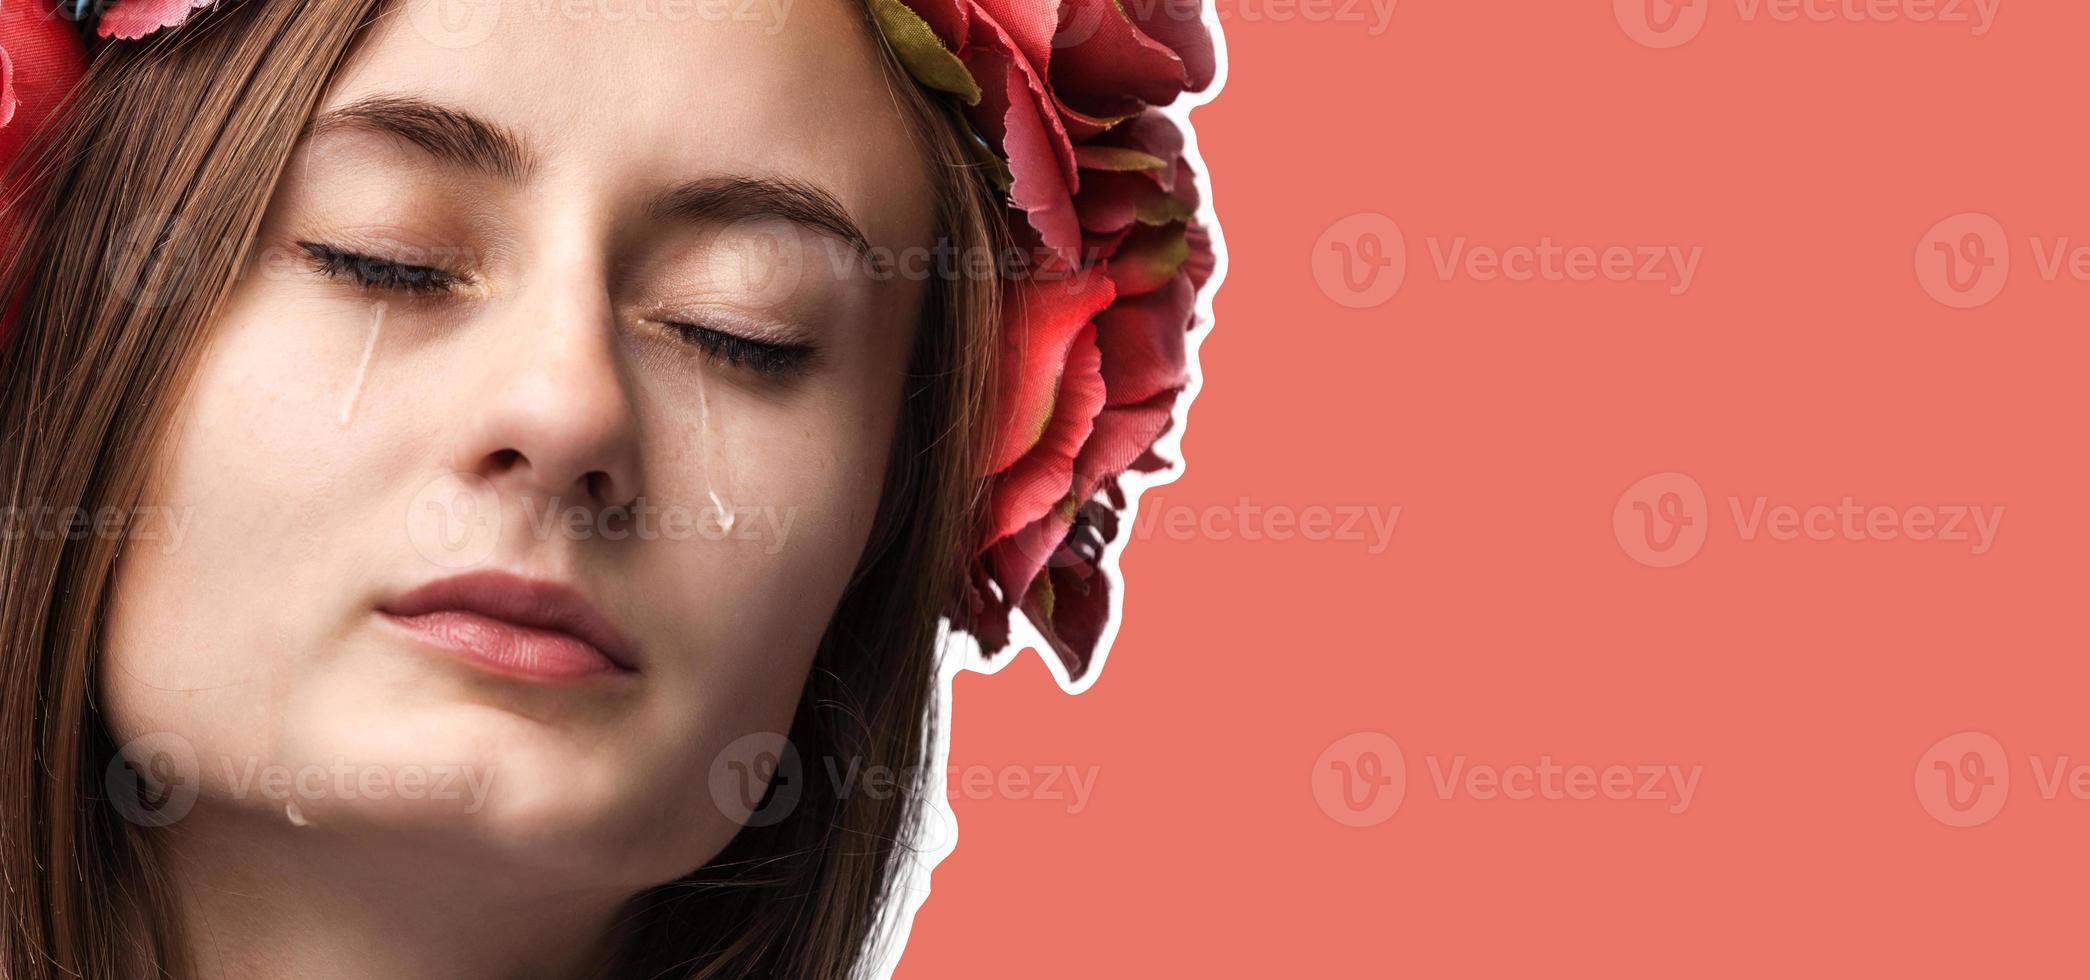 Portrait of young beautiful woman crying photo